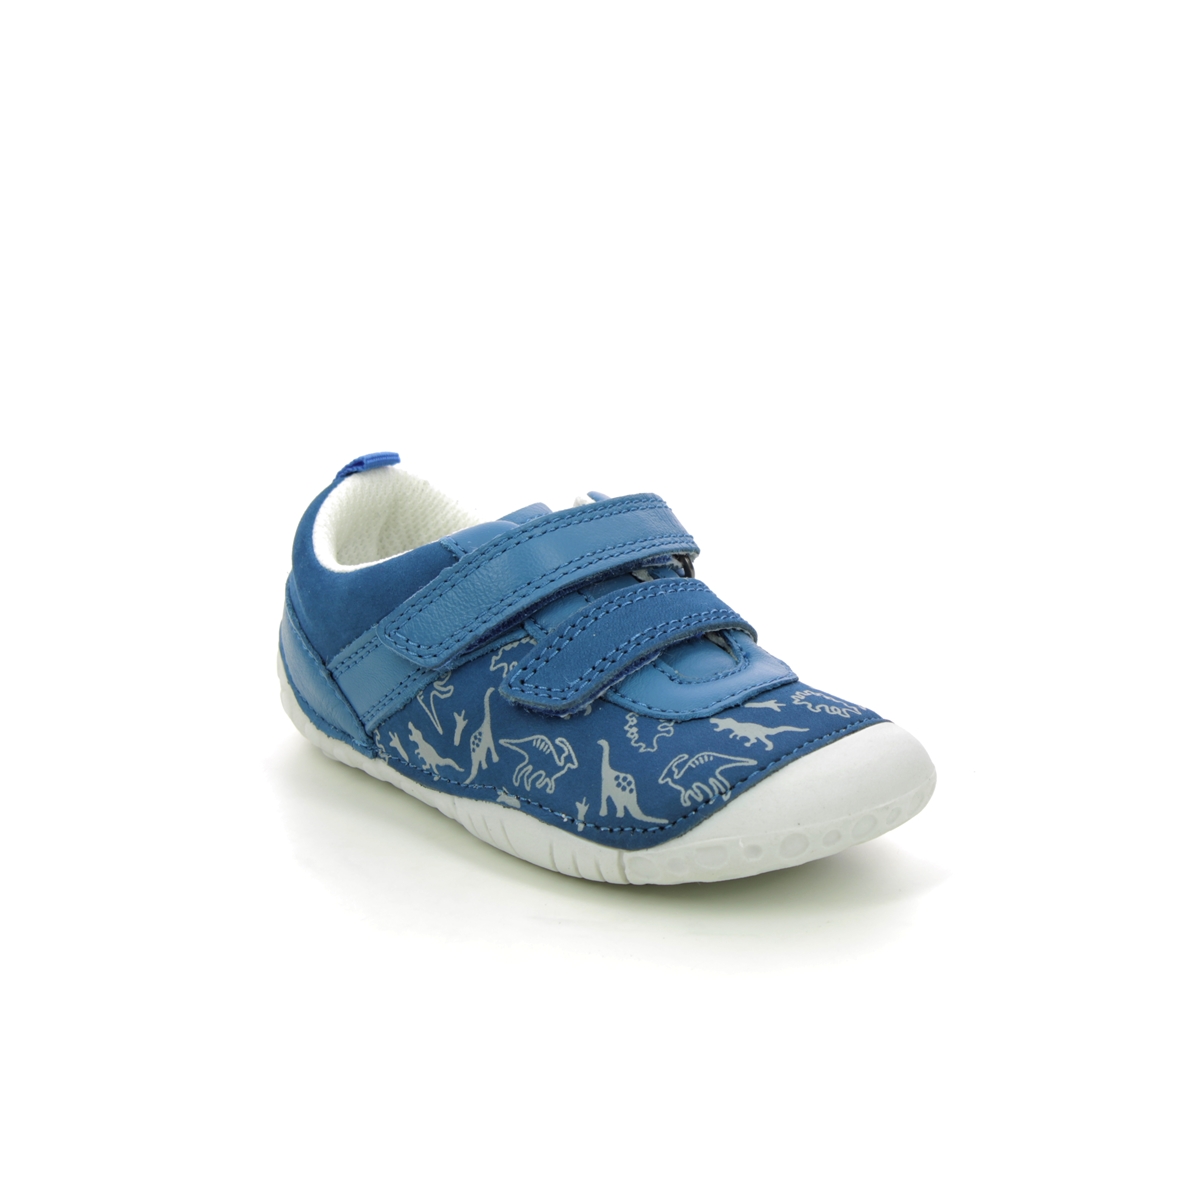 Start Rite - Roar 2V In Blue Nubuck 0767-26F In Size 3 In Plain Blue Nubuck Boys First And Toddler Shoes  In Blue Nubuck For kids